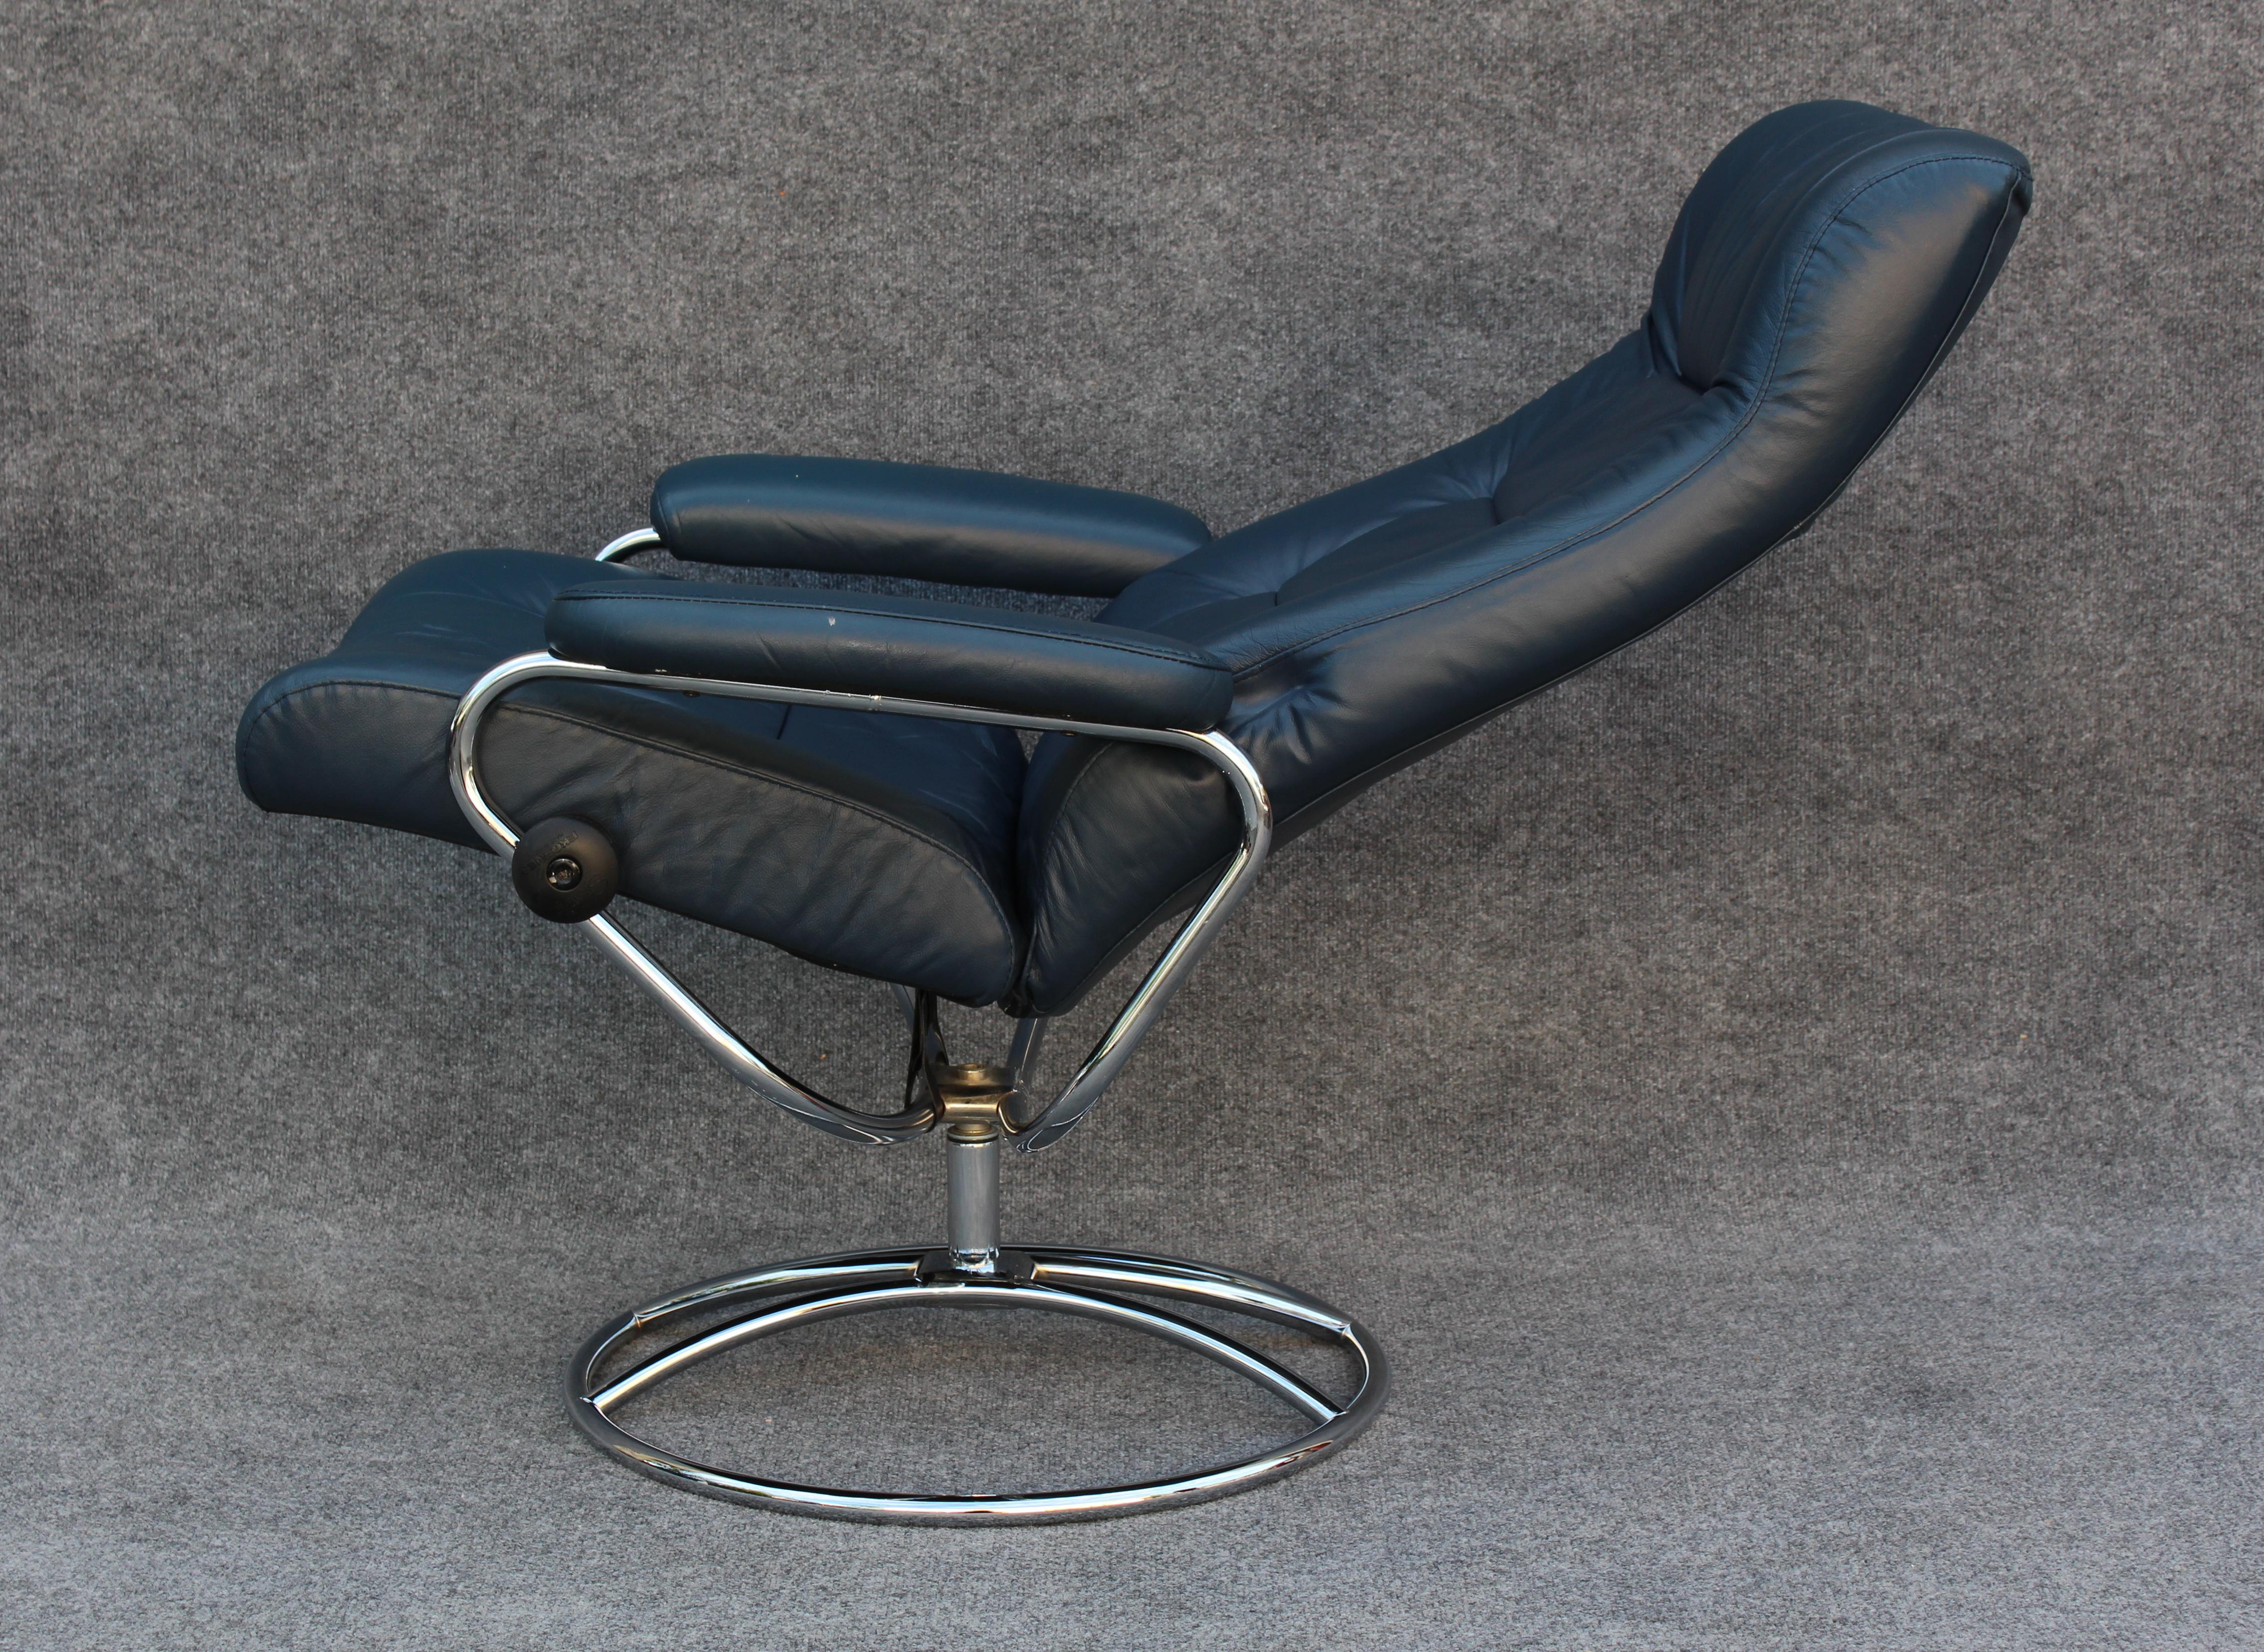 Ekornes Stressless Stressless Lounge Chair & Ottoman, Navy Blue Leather & Steel In Good Condition For Sale In Philadelphia, PA